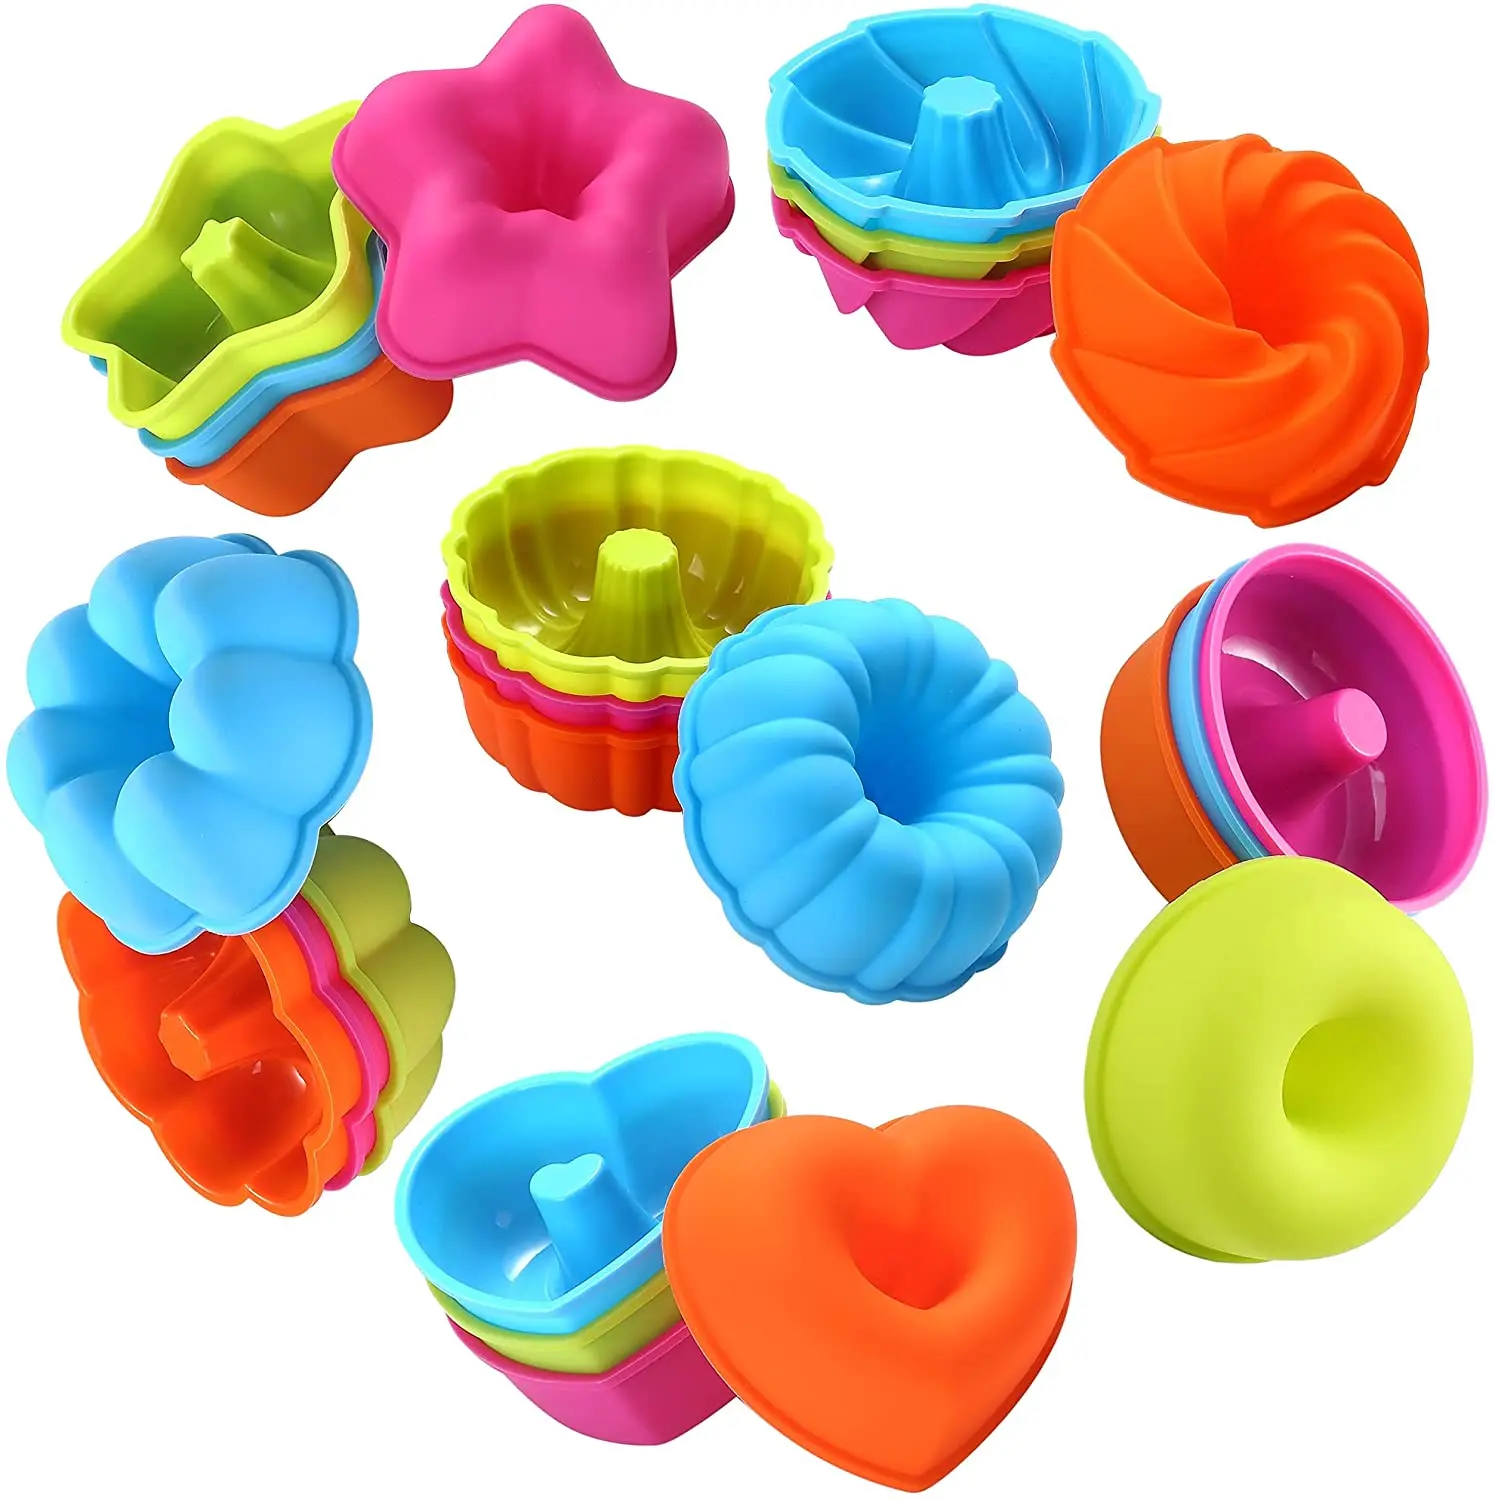 

Nonstick Reusable 24PCS Silicone Mini Donut Muffin Pumpkin Cupcake Liners DIY Pastry Baking Cake Mold